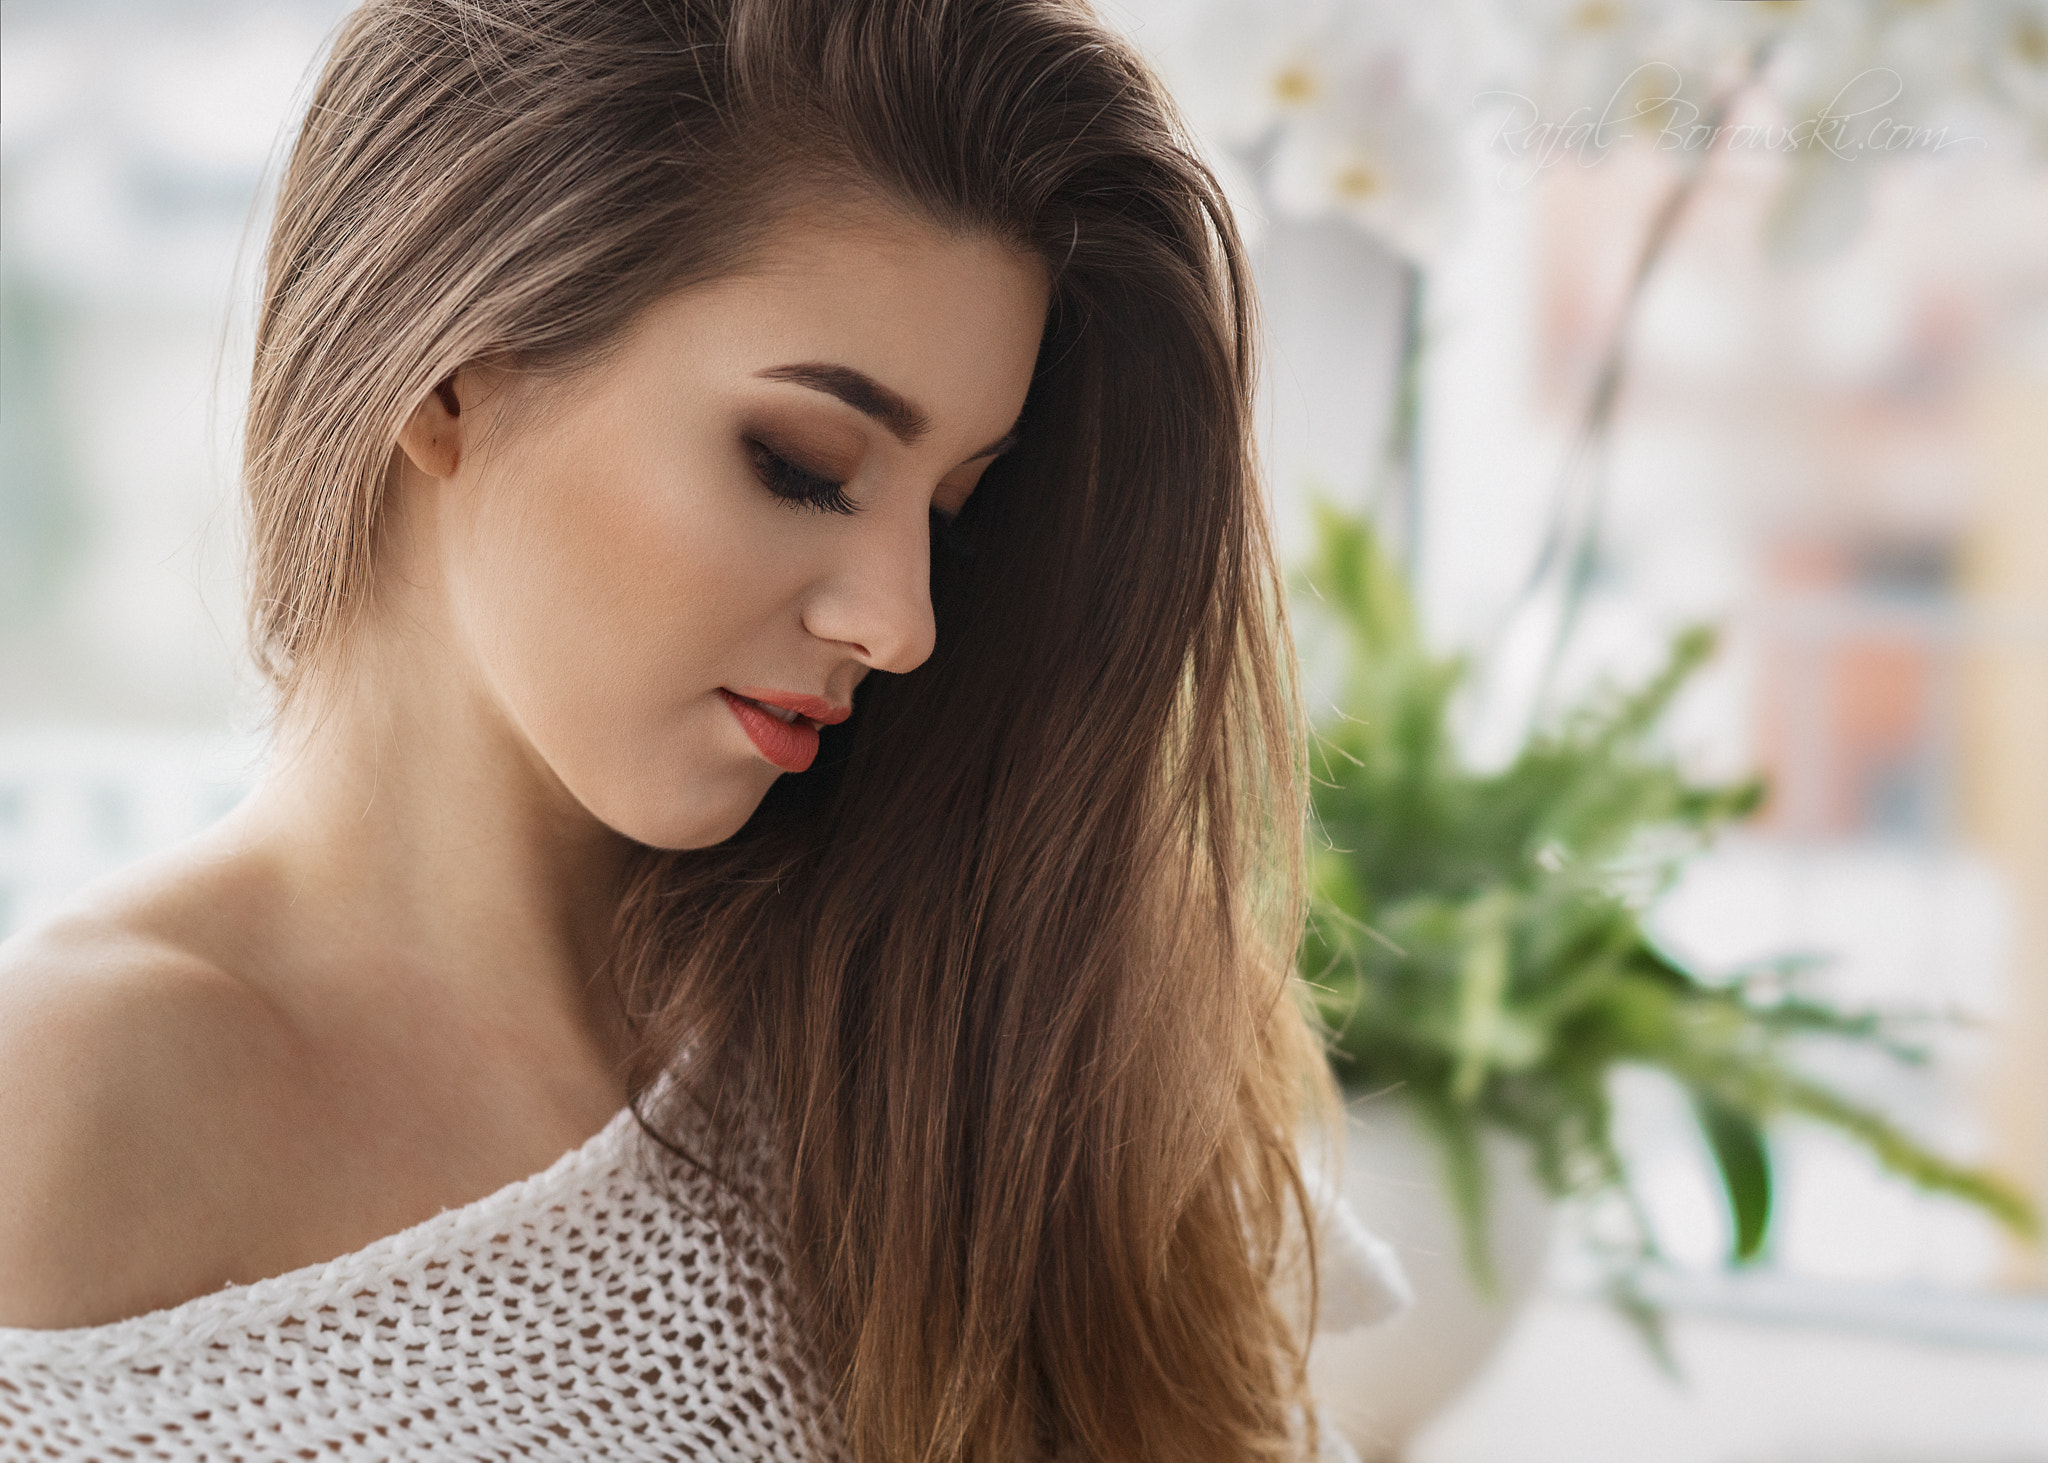 People 2048x1463 women face portrait flowers depth of field closed eyes white sweater long hair open mouth young women looking below makeup white clothing bare shoulders closeup knit fabric